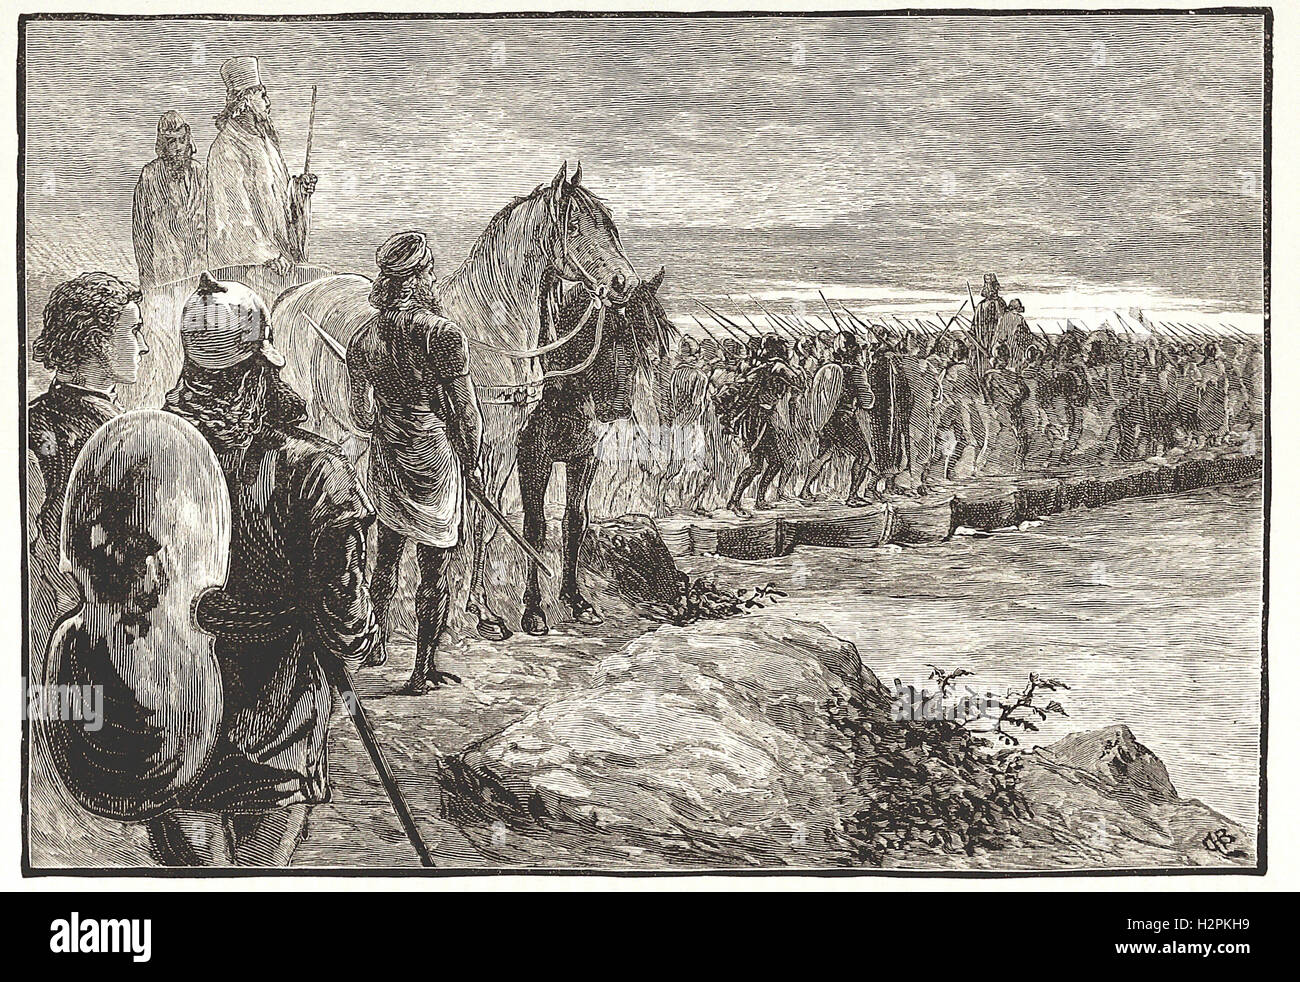 XERXES CROSSING THE HELLESPONT - from 'Cassell's Illustrated Universal History' - 1882 Stock Photo